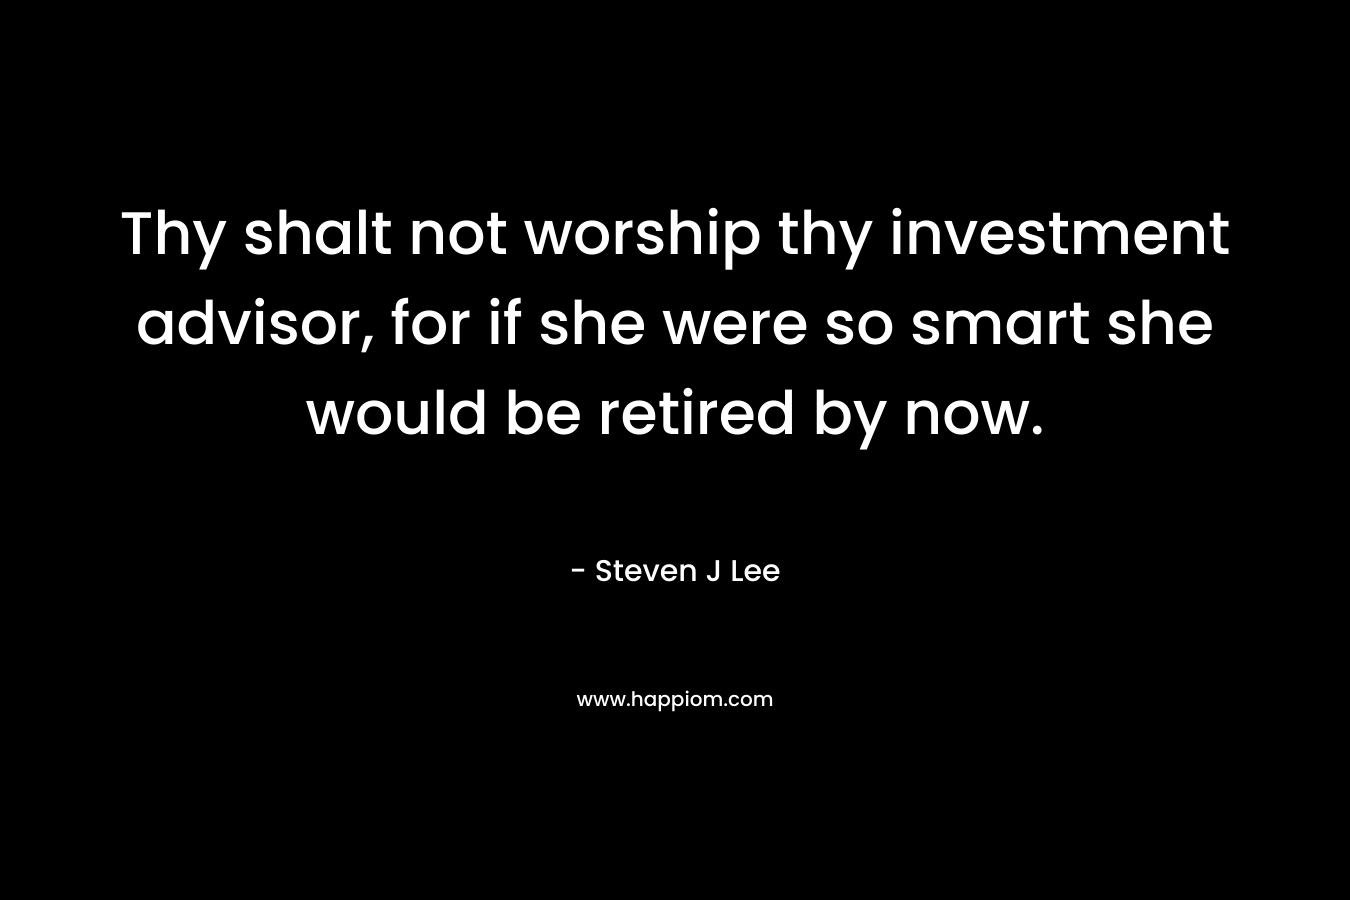 Thy shalt not worship thy investment advisor, for if she were so smart she would be retired by now.